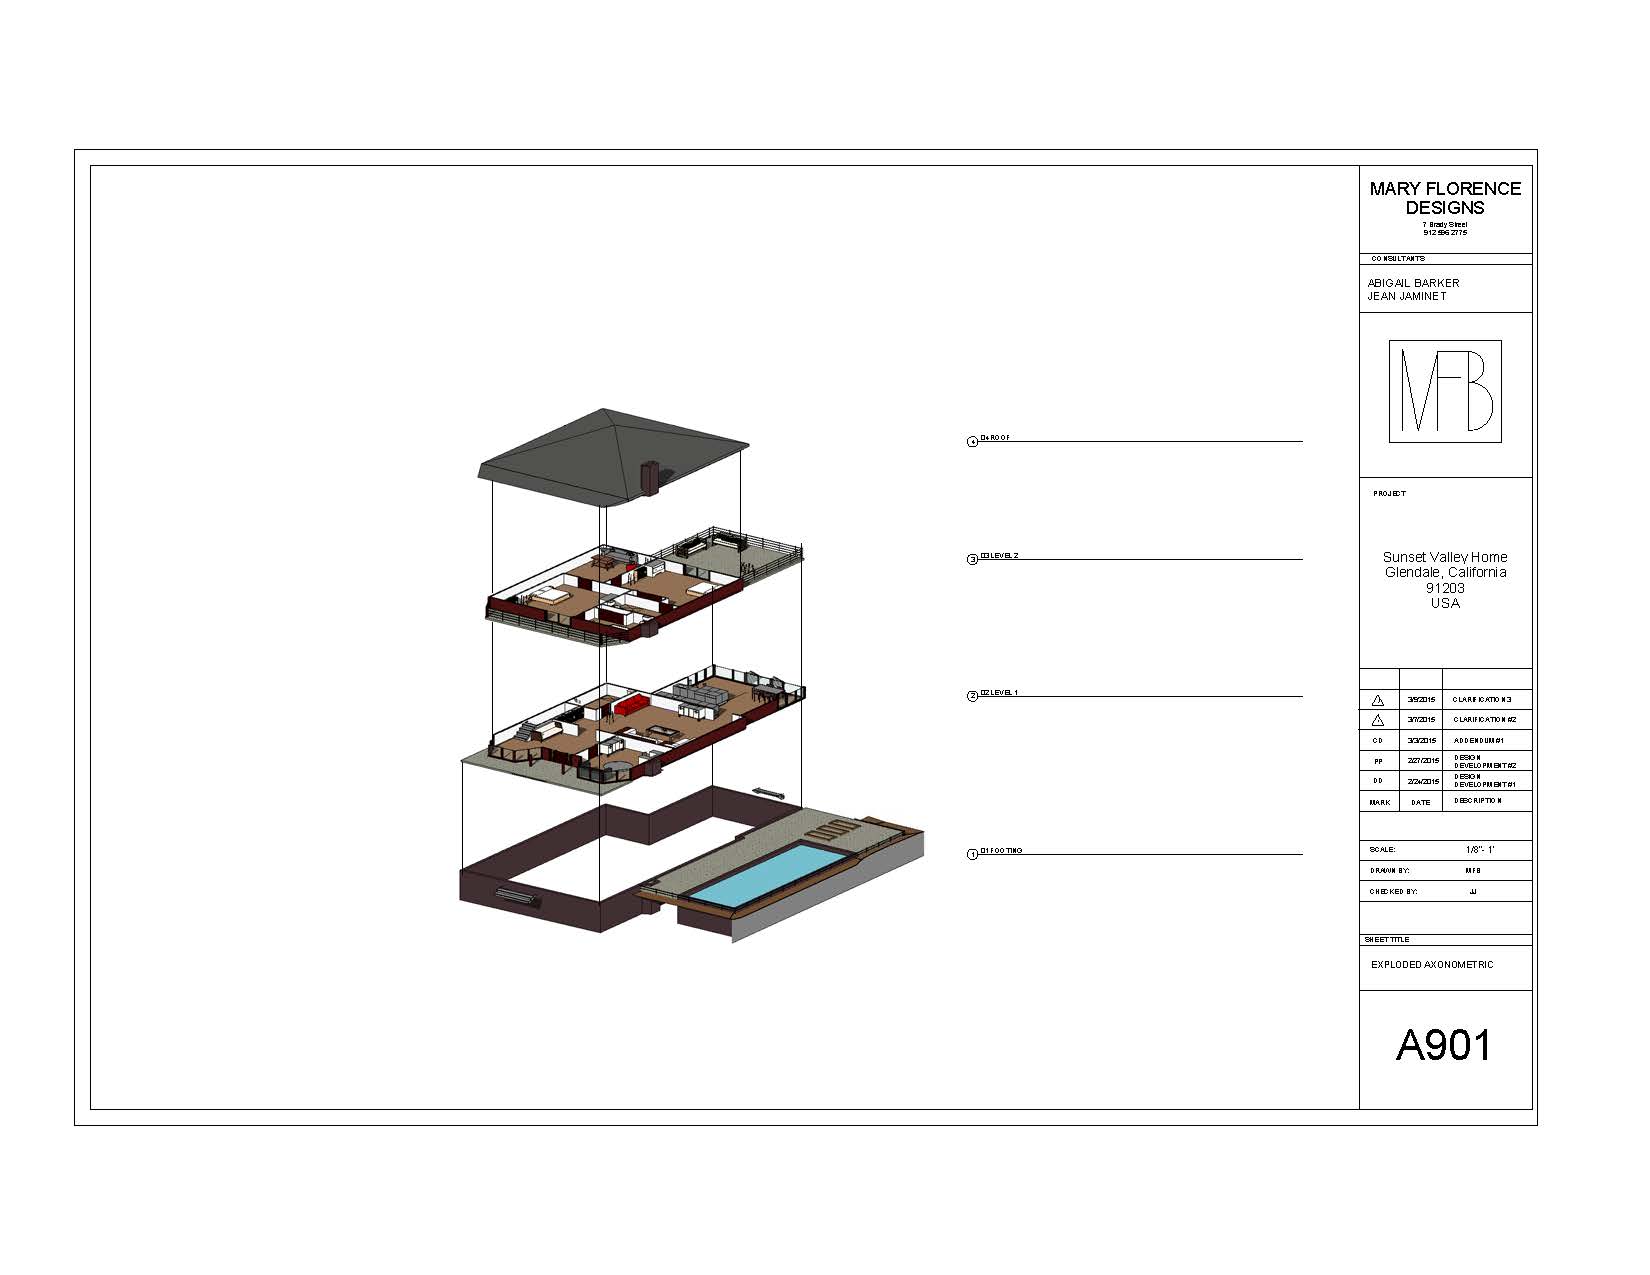 brown_final project model_Page_14.jpg